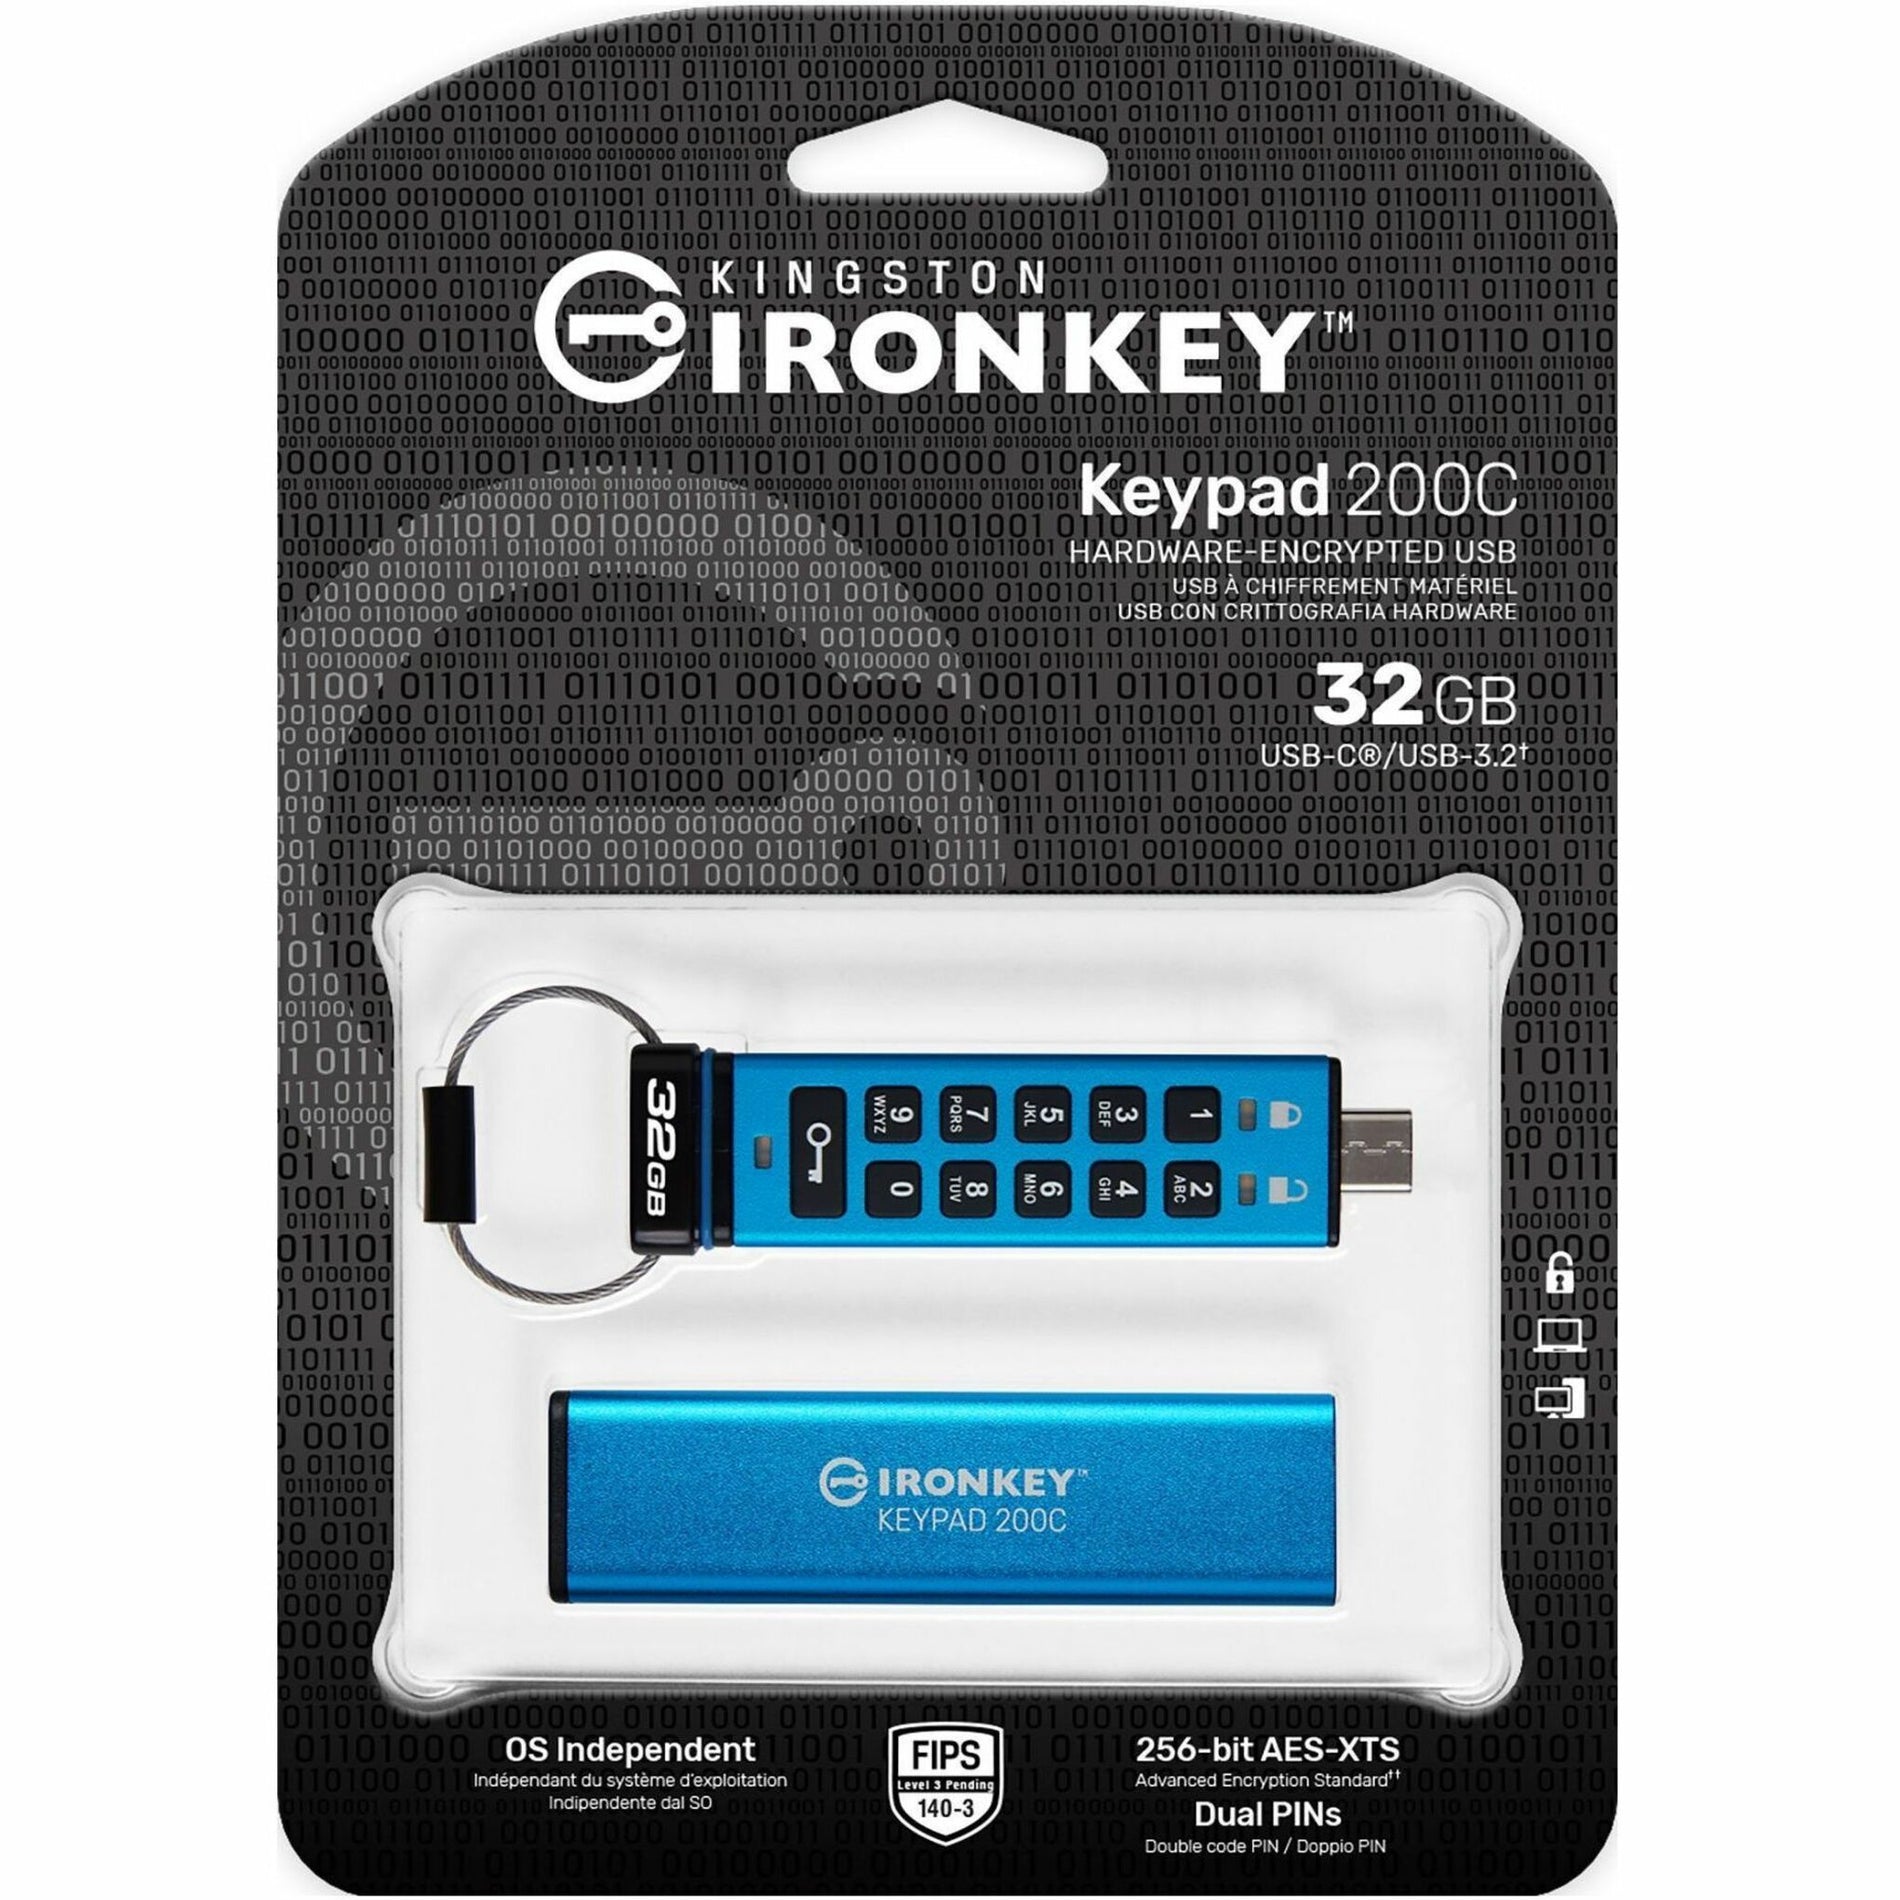 IronKey IKKP200C/32GB FIPS 140-3 Level 3 (Pending) Certified Keypad Drive, 32GB Flash Drive with 256-bit AES Encryption